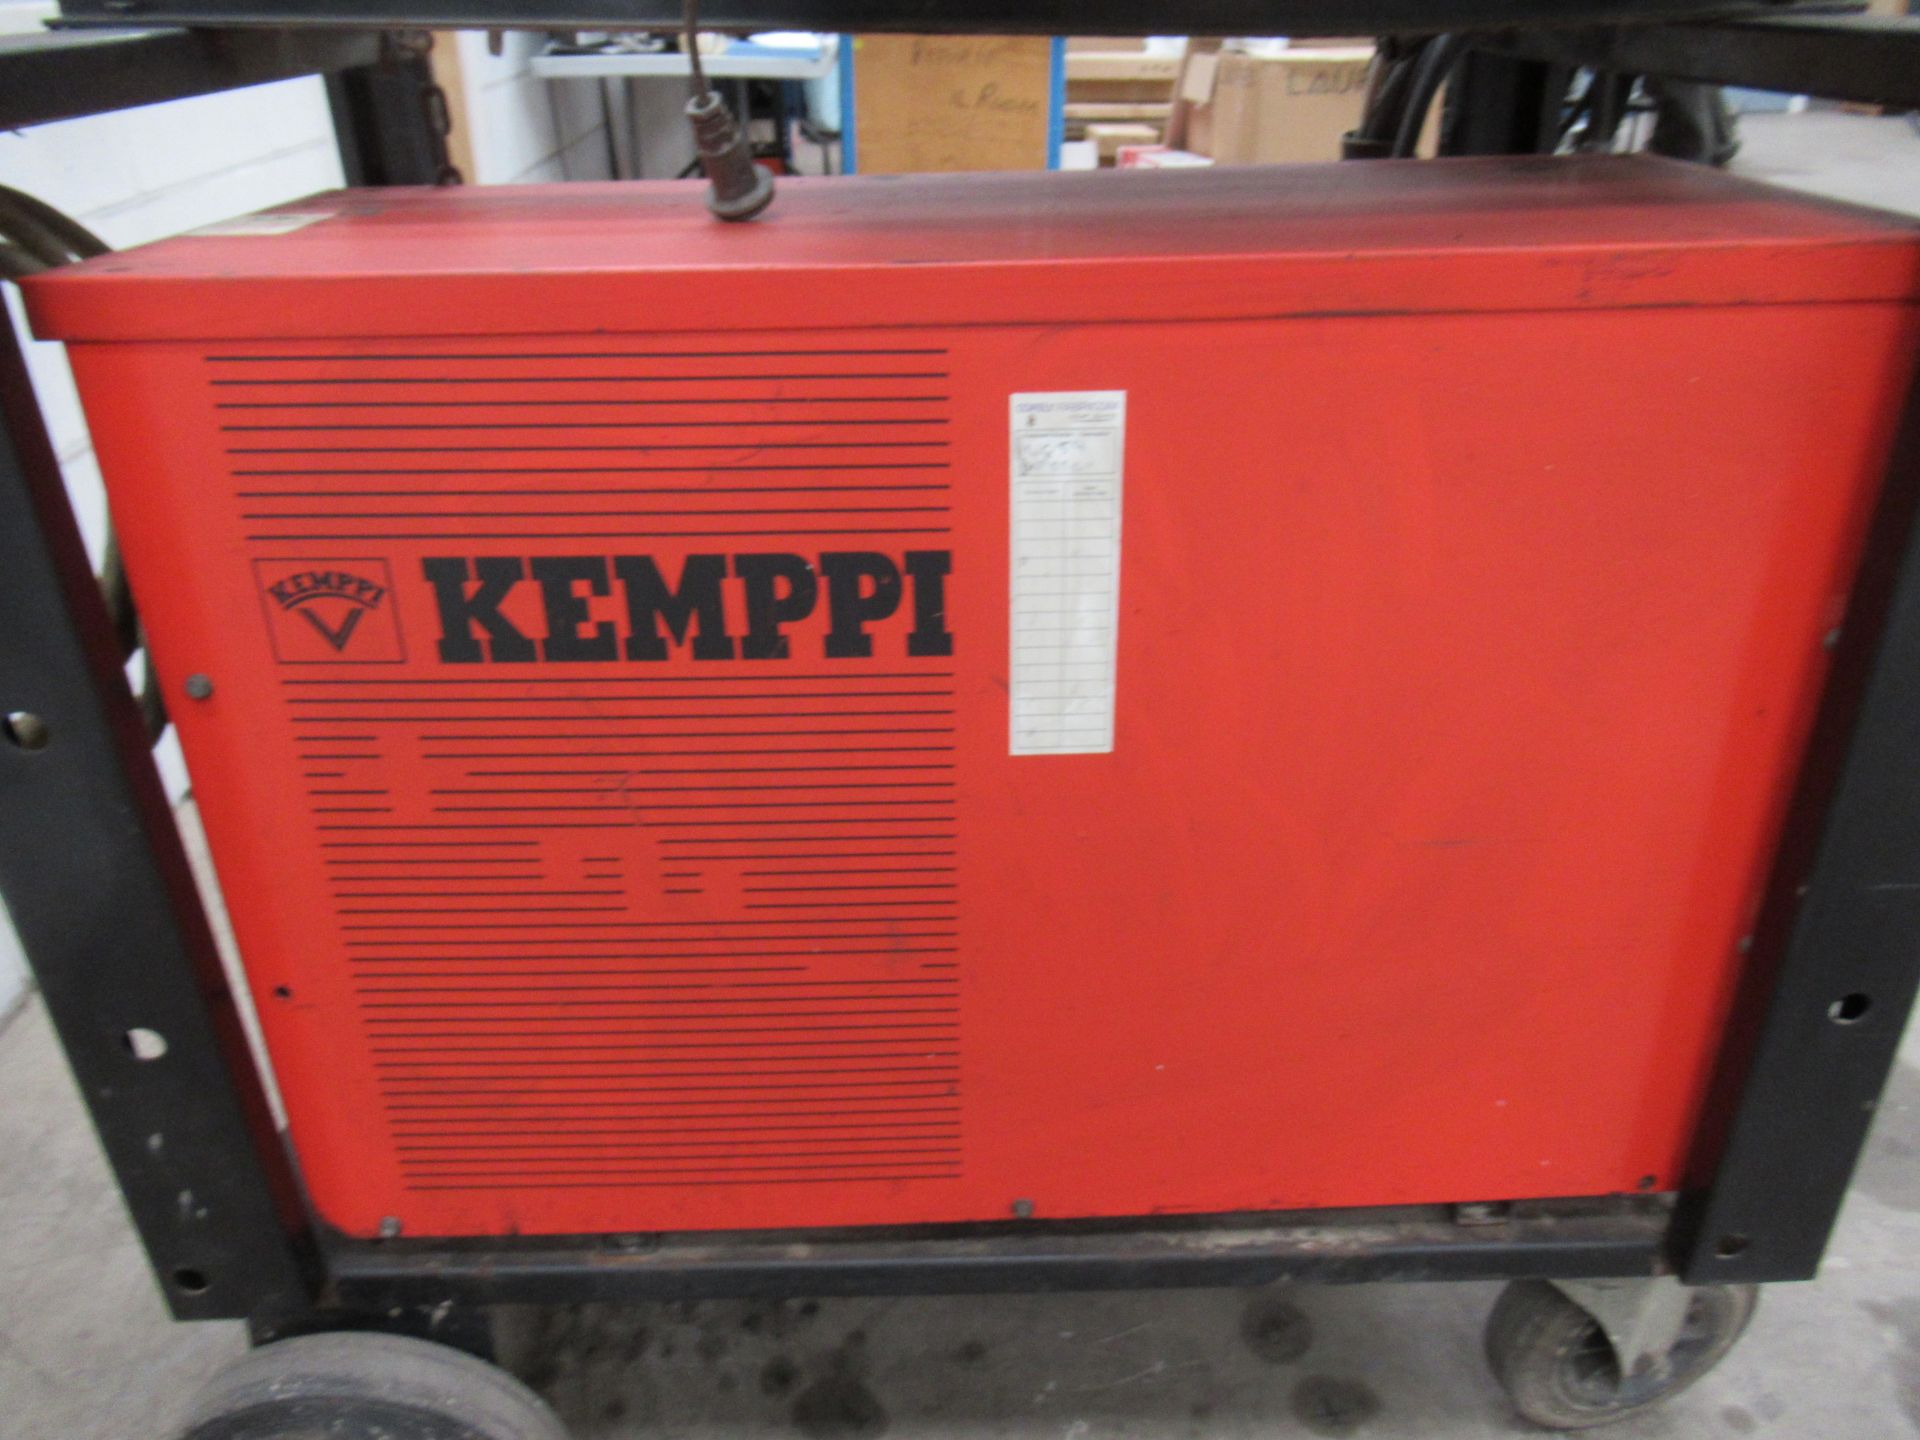 Kemppi PSS5000 welder and Kemppi TU50 controller and Kemppi WU10 water cooler with leads etc - Image 3 of 12